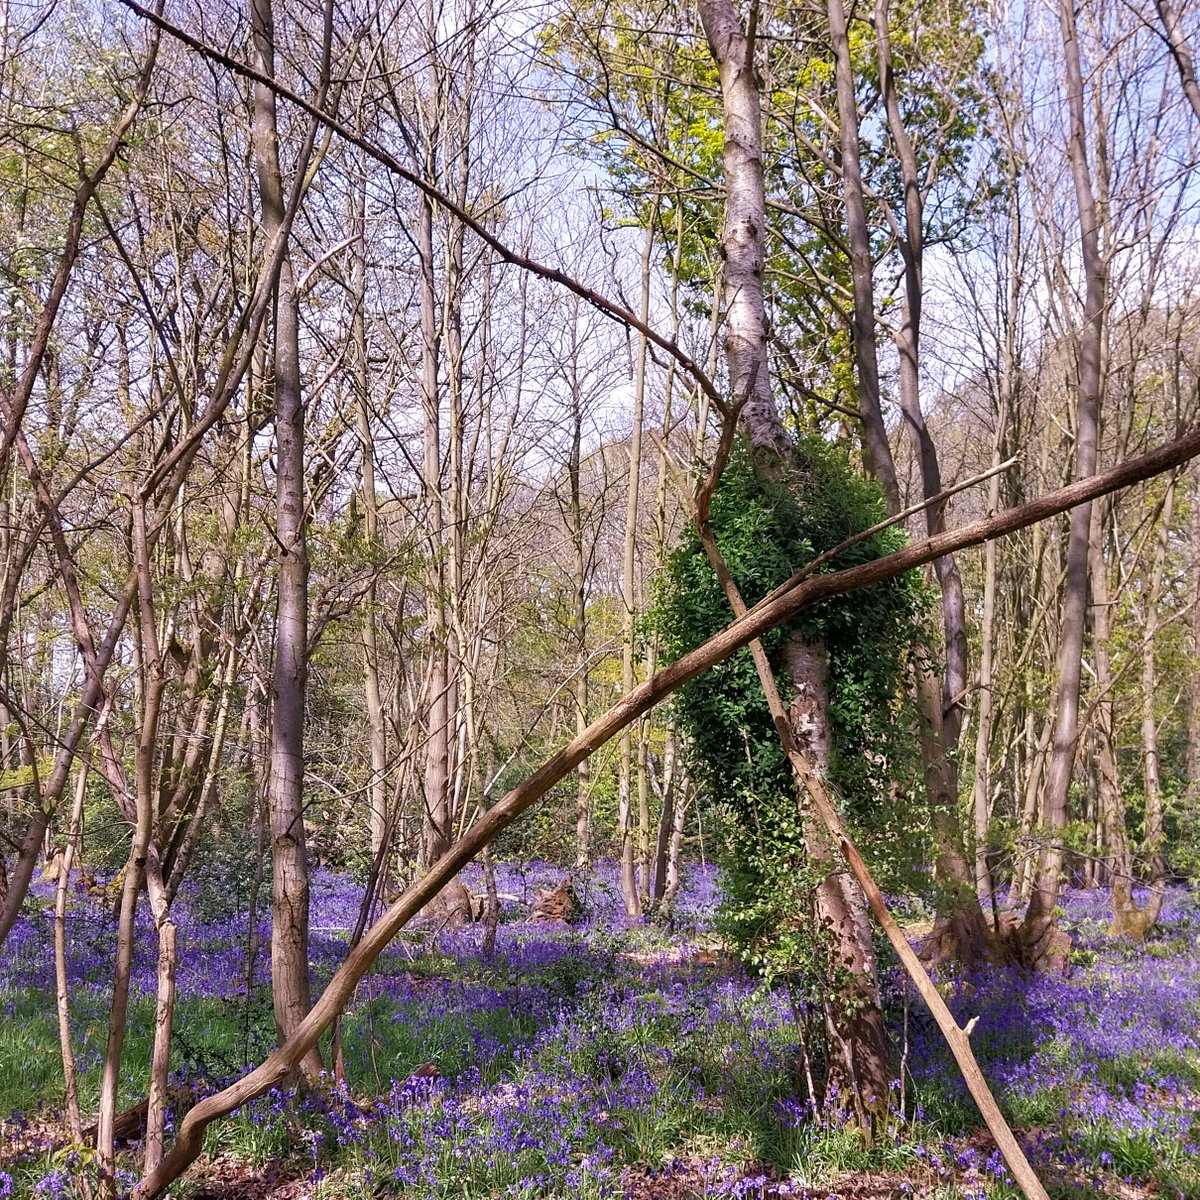 Oh Wow! 💜 Bluebell season has come to High Woods Country Park! Our Park Rangers say this is the weekend to check them out as they're at their peak. You can pick up a map from the Visitor Centre for £1 to locate the best spots to see the incredible display. 🤩